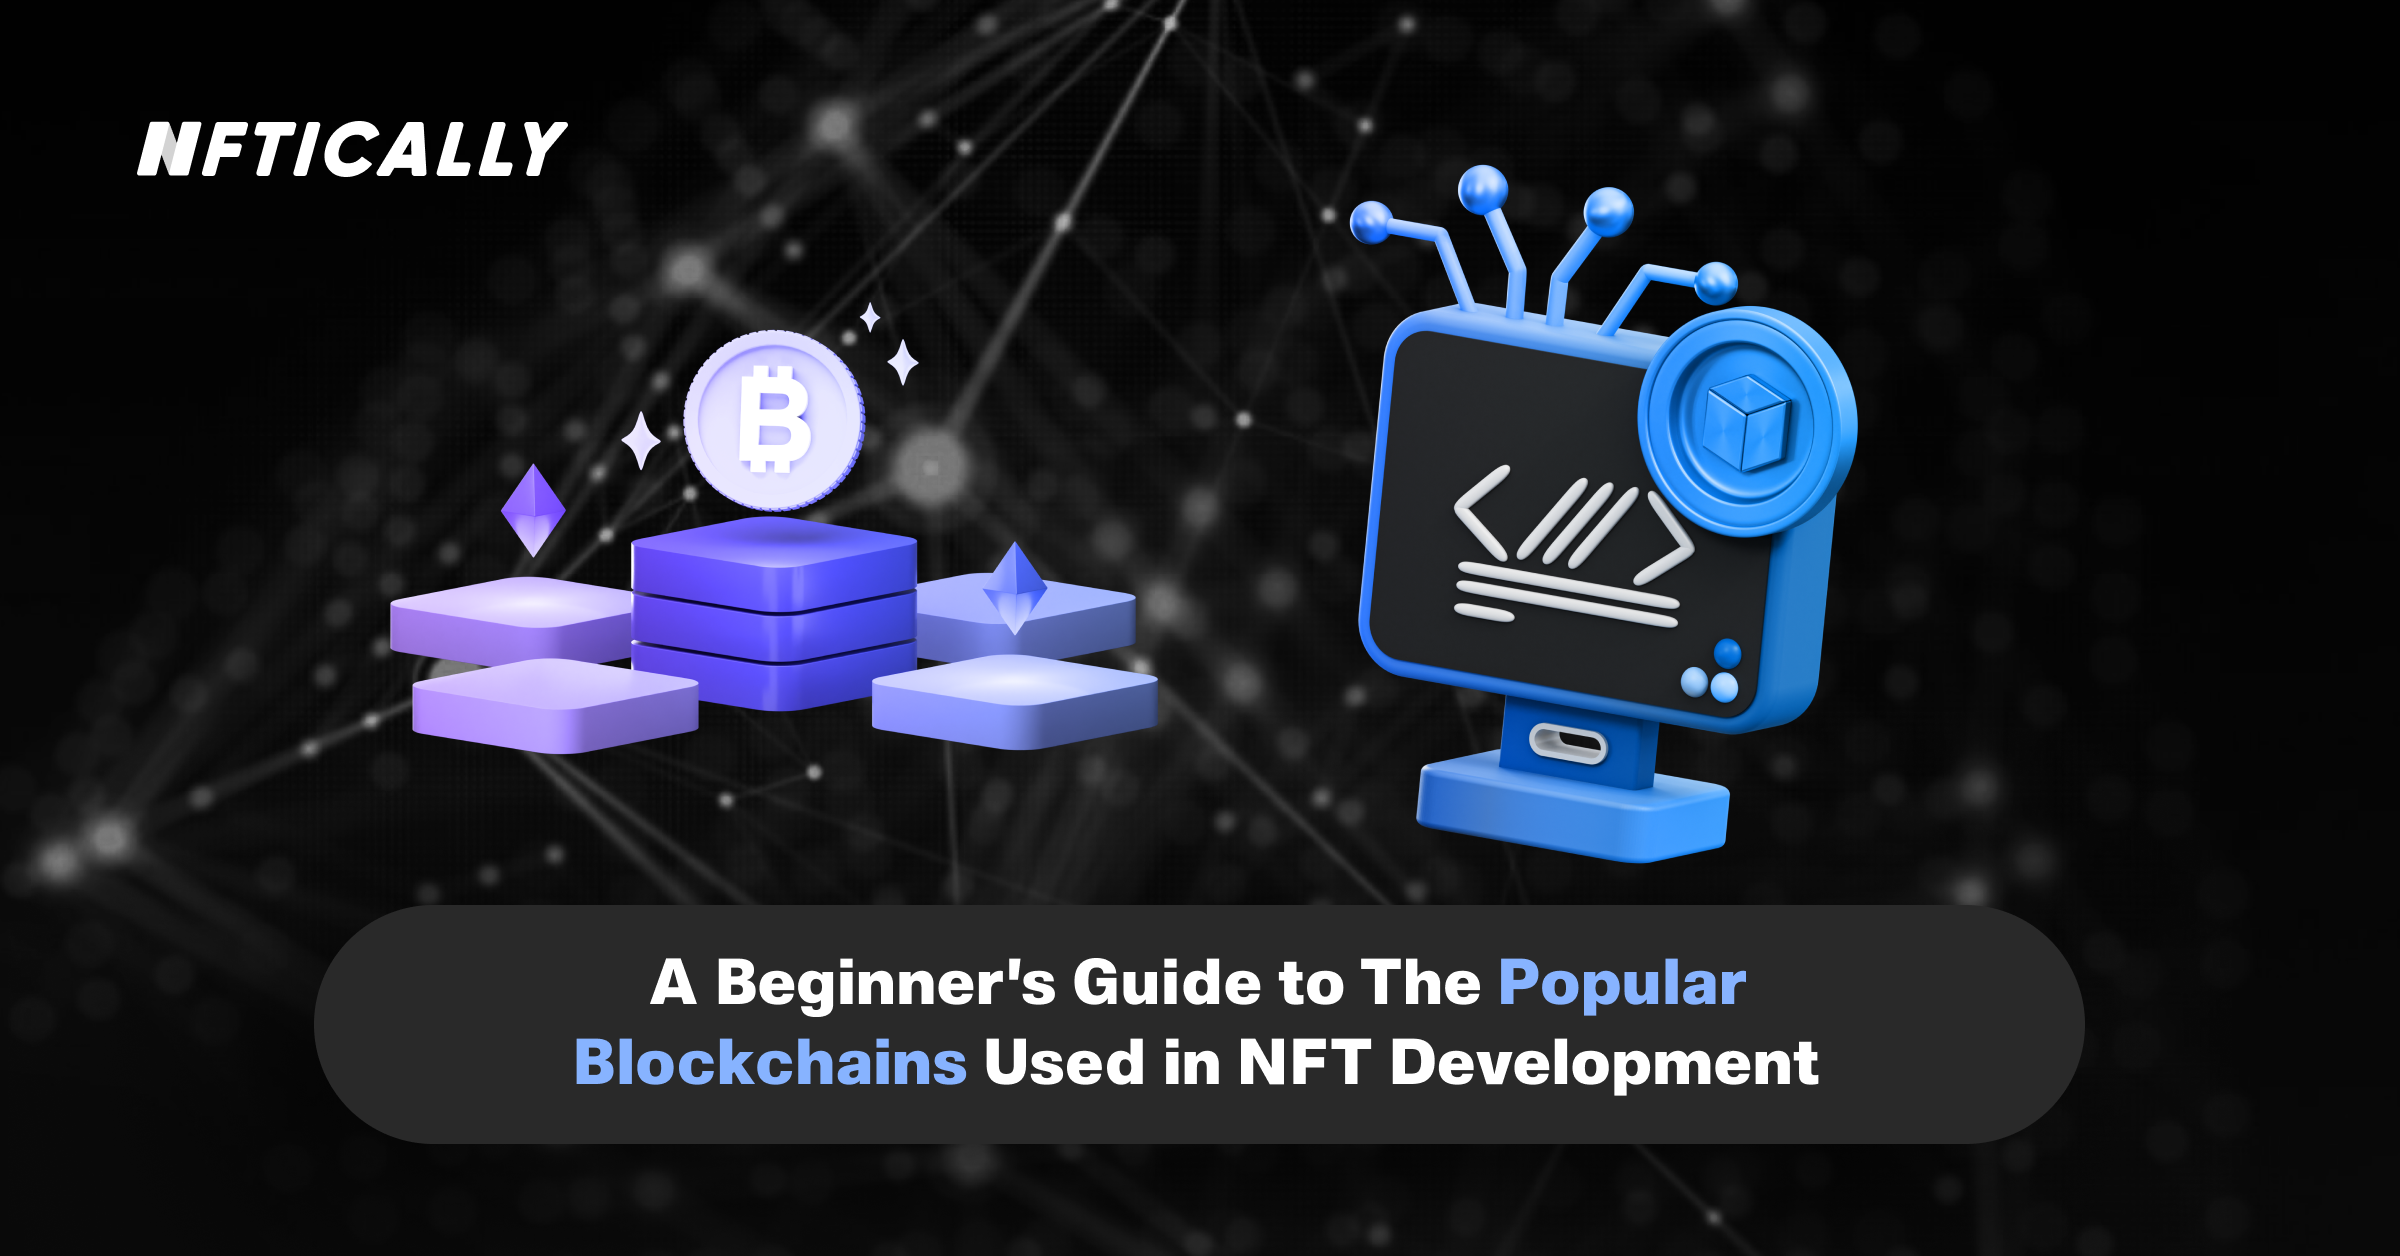 A beginner’s Guide to The Popular Blockchains Used in NFT Development